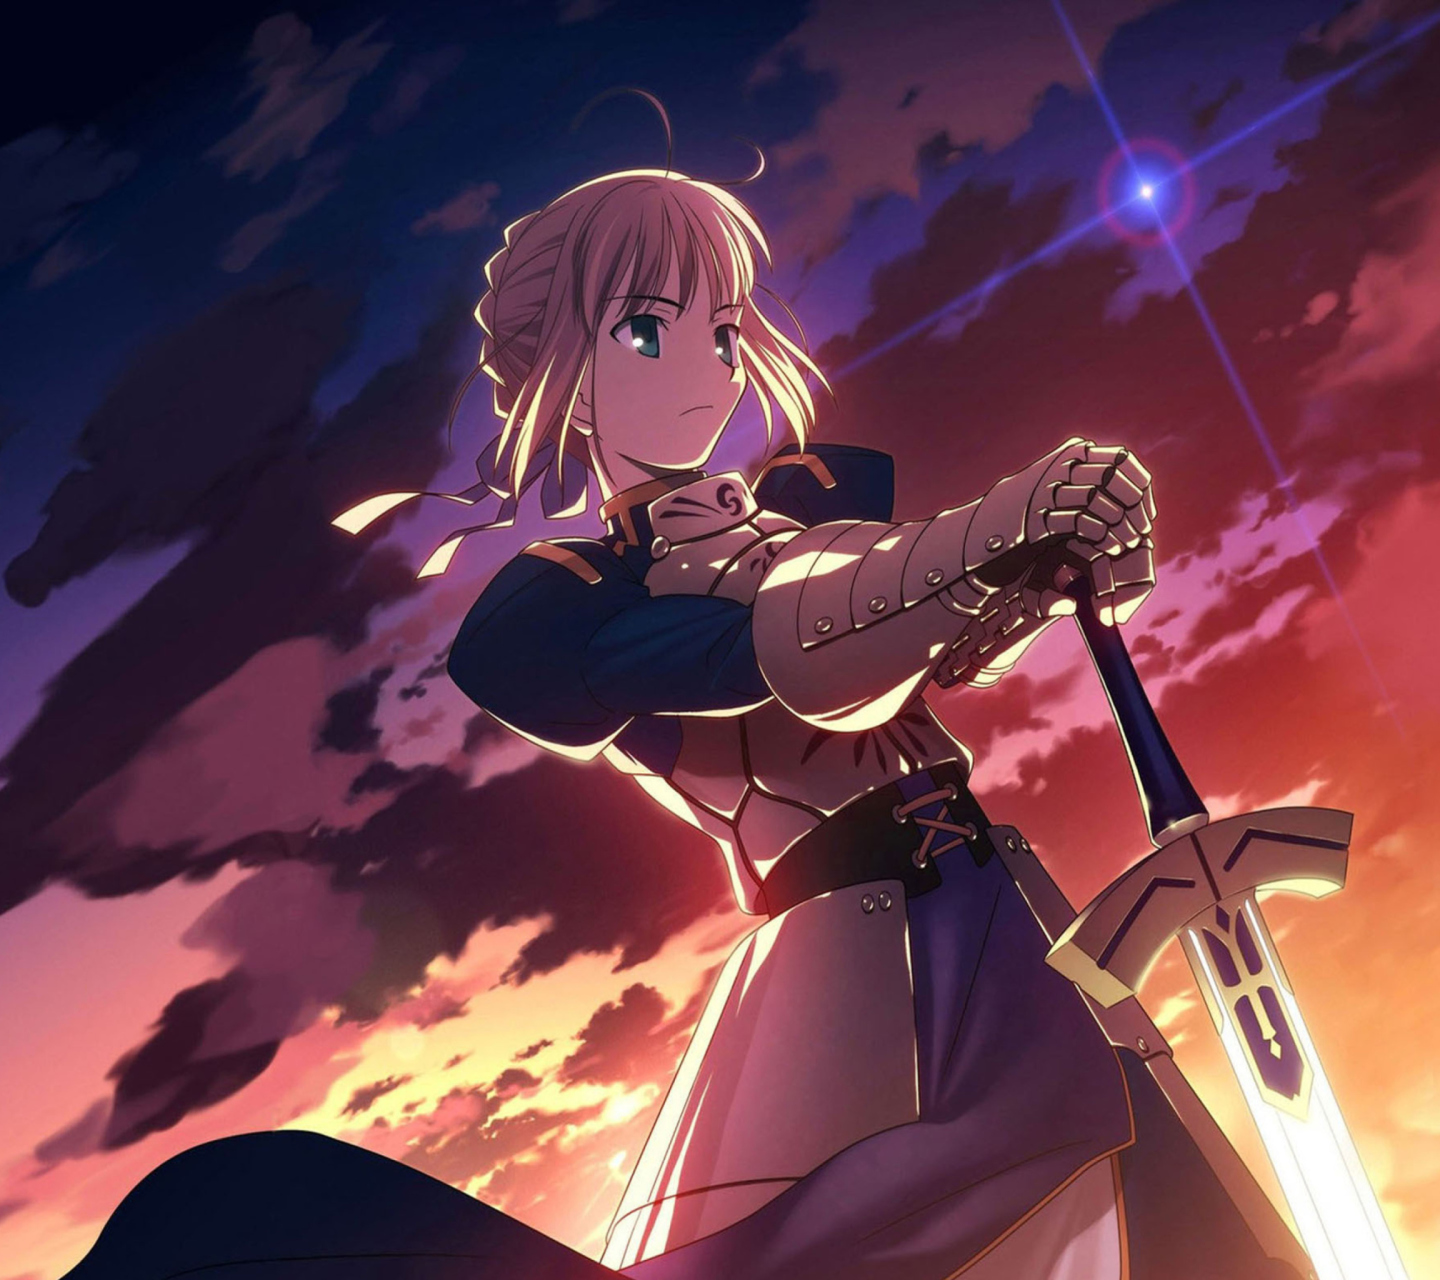 Saber from Fate/stay night screenshot #1 1440x1280